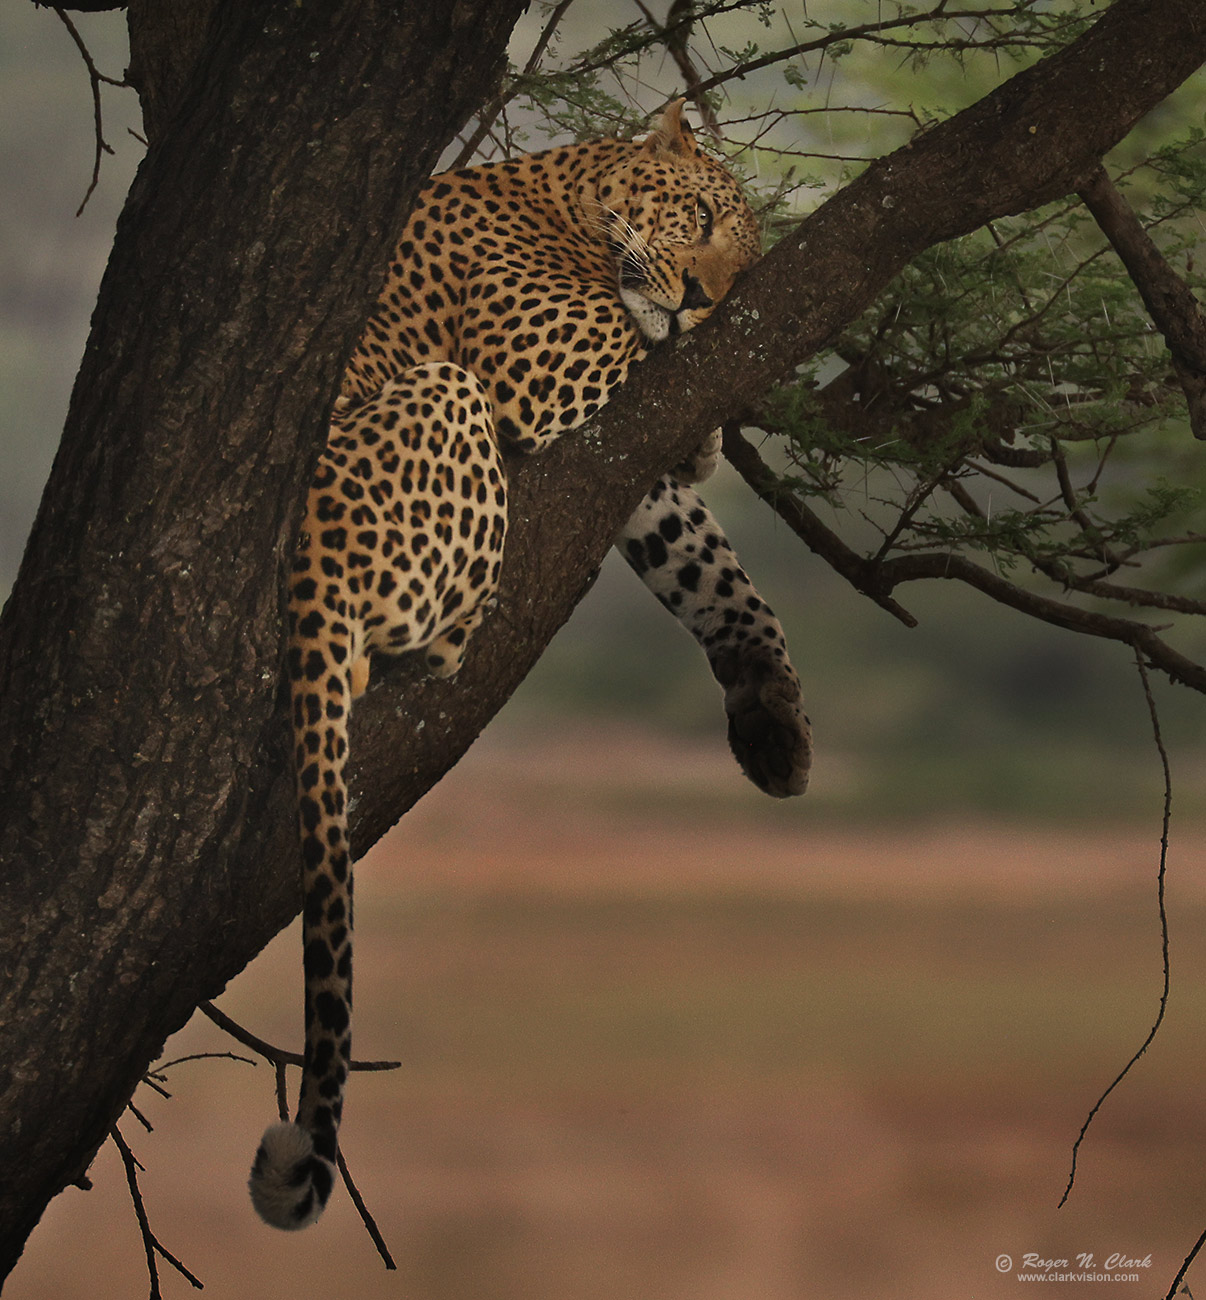 image leopard-in-tree-c02-19-2024-4C3A1501-c-1300s.jpg is Copyrighted by Roger N. Clark, www.clarkvision.com